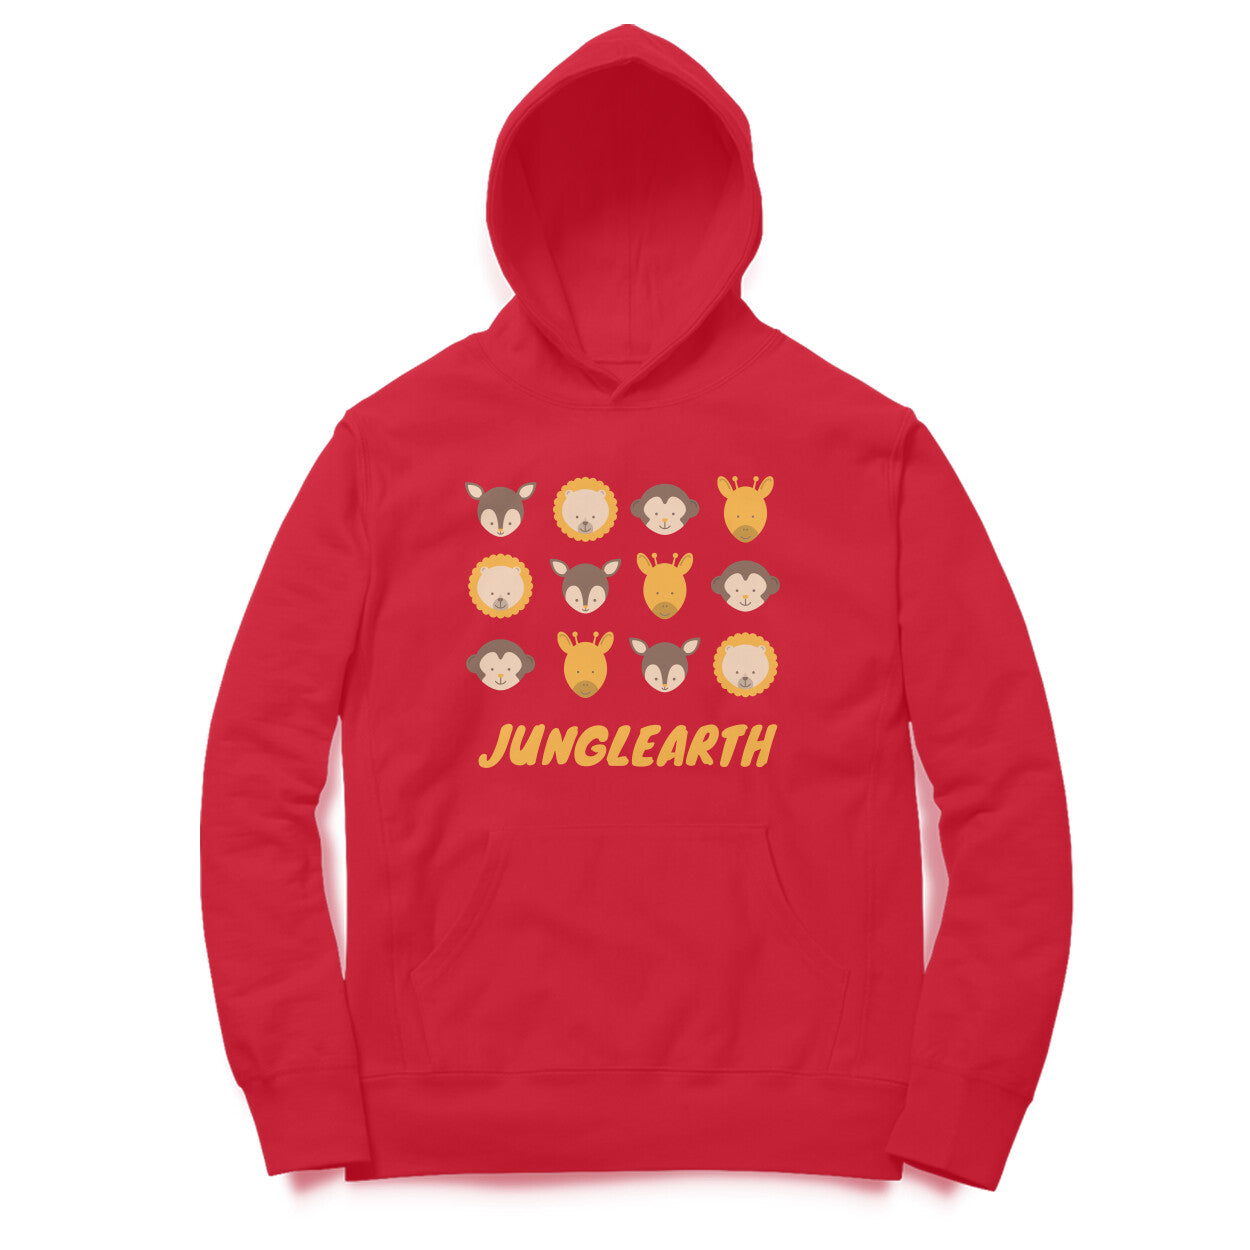 Junglearth Blue and Orange Animal Protection Advocacy and Cause Hoodie